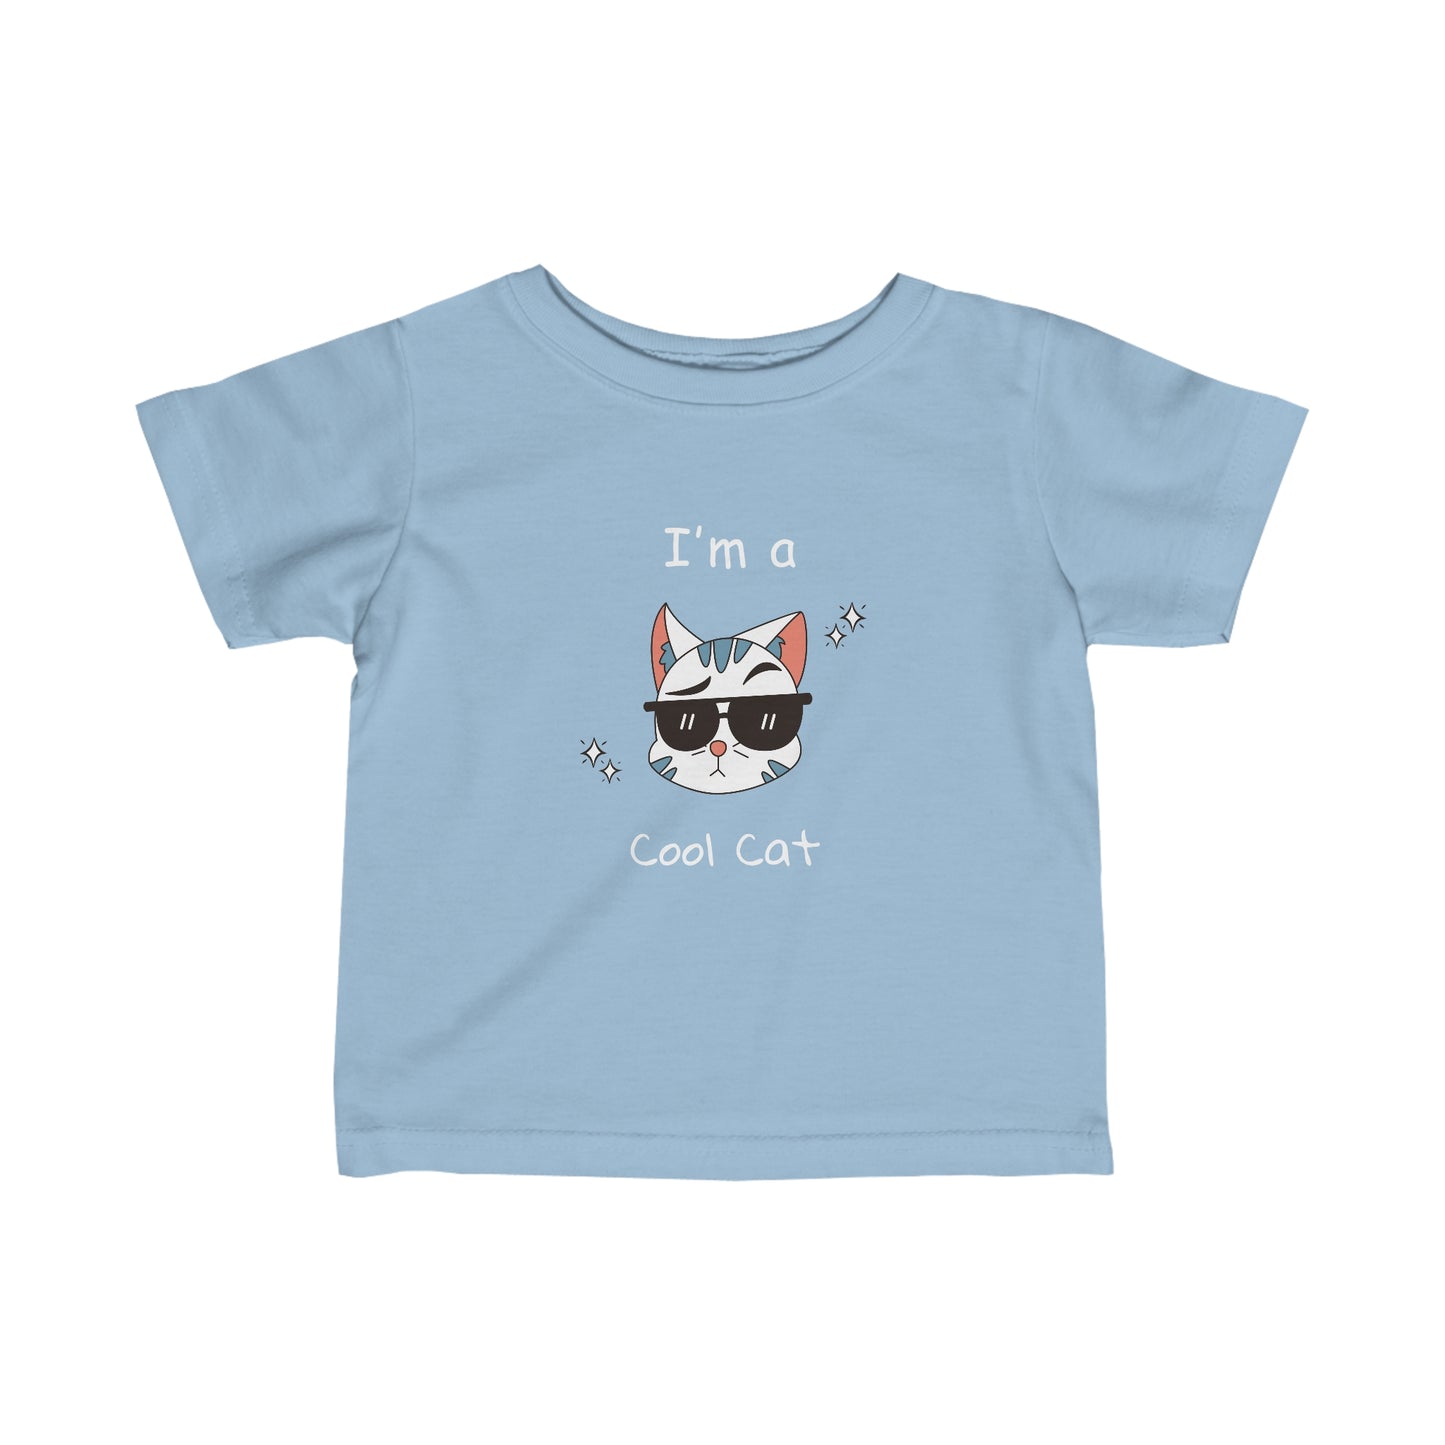 I'm A Cool Cat. Infant Fine Jersey Tee